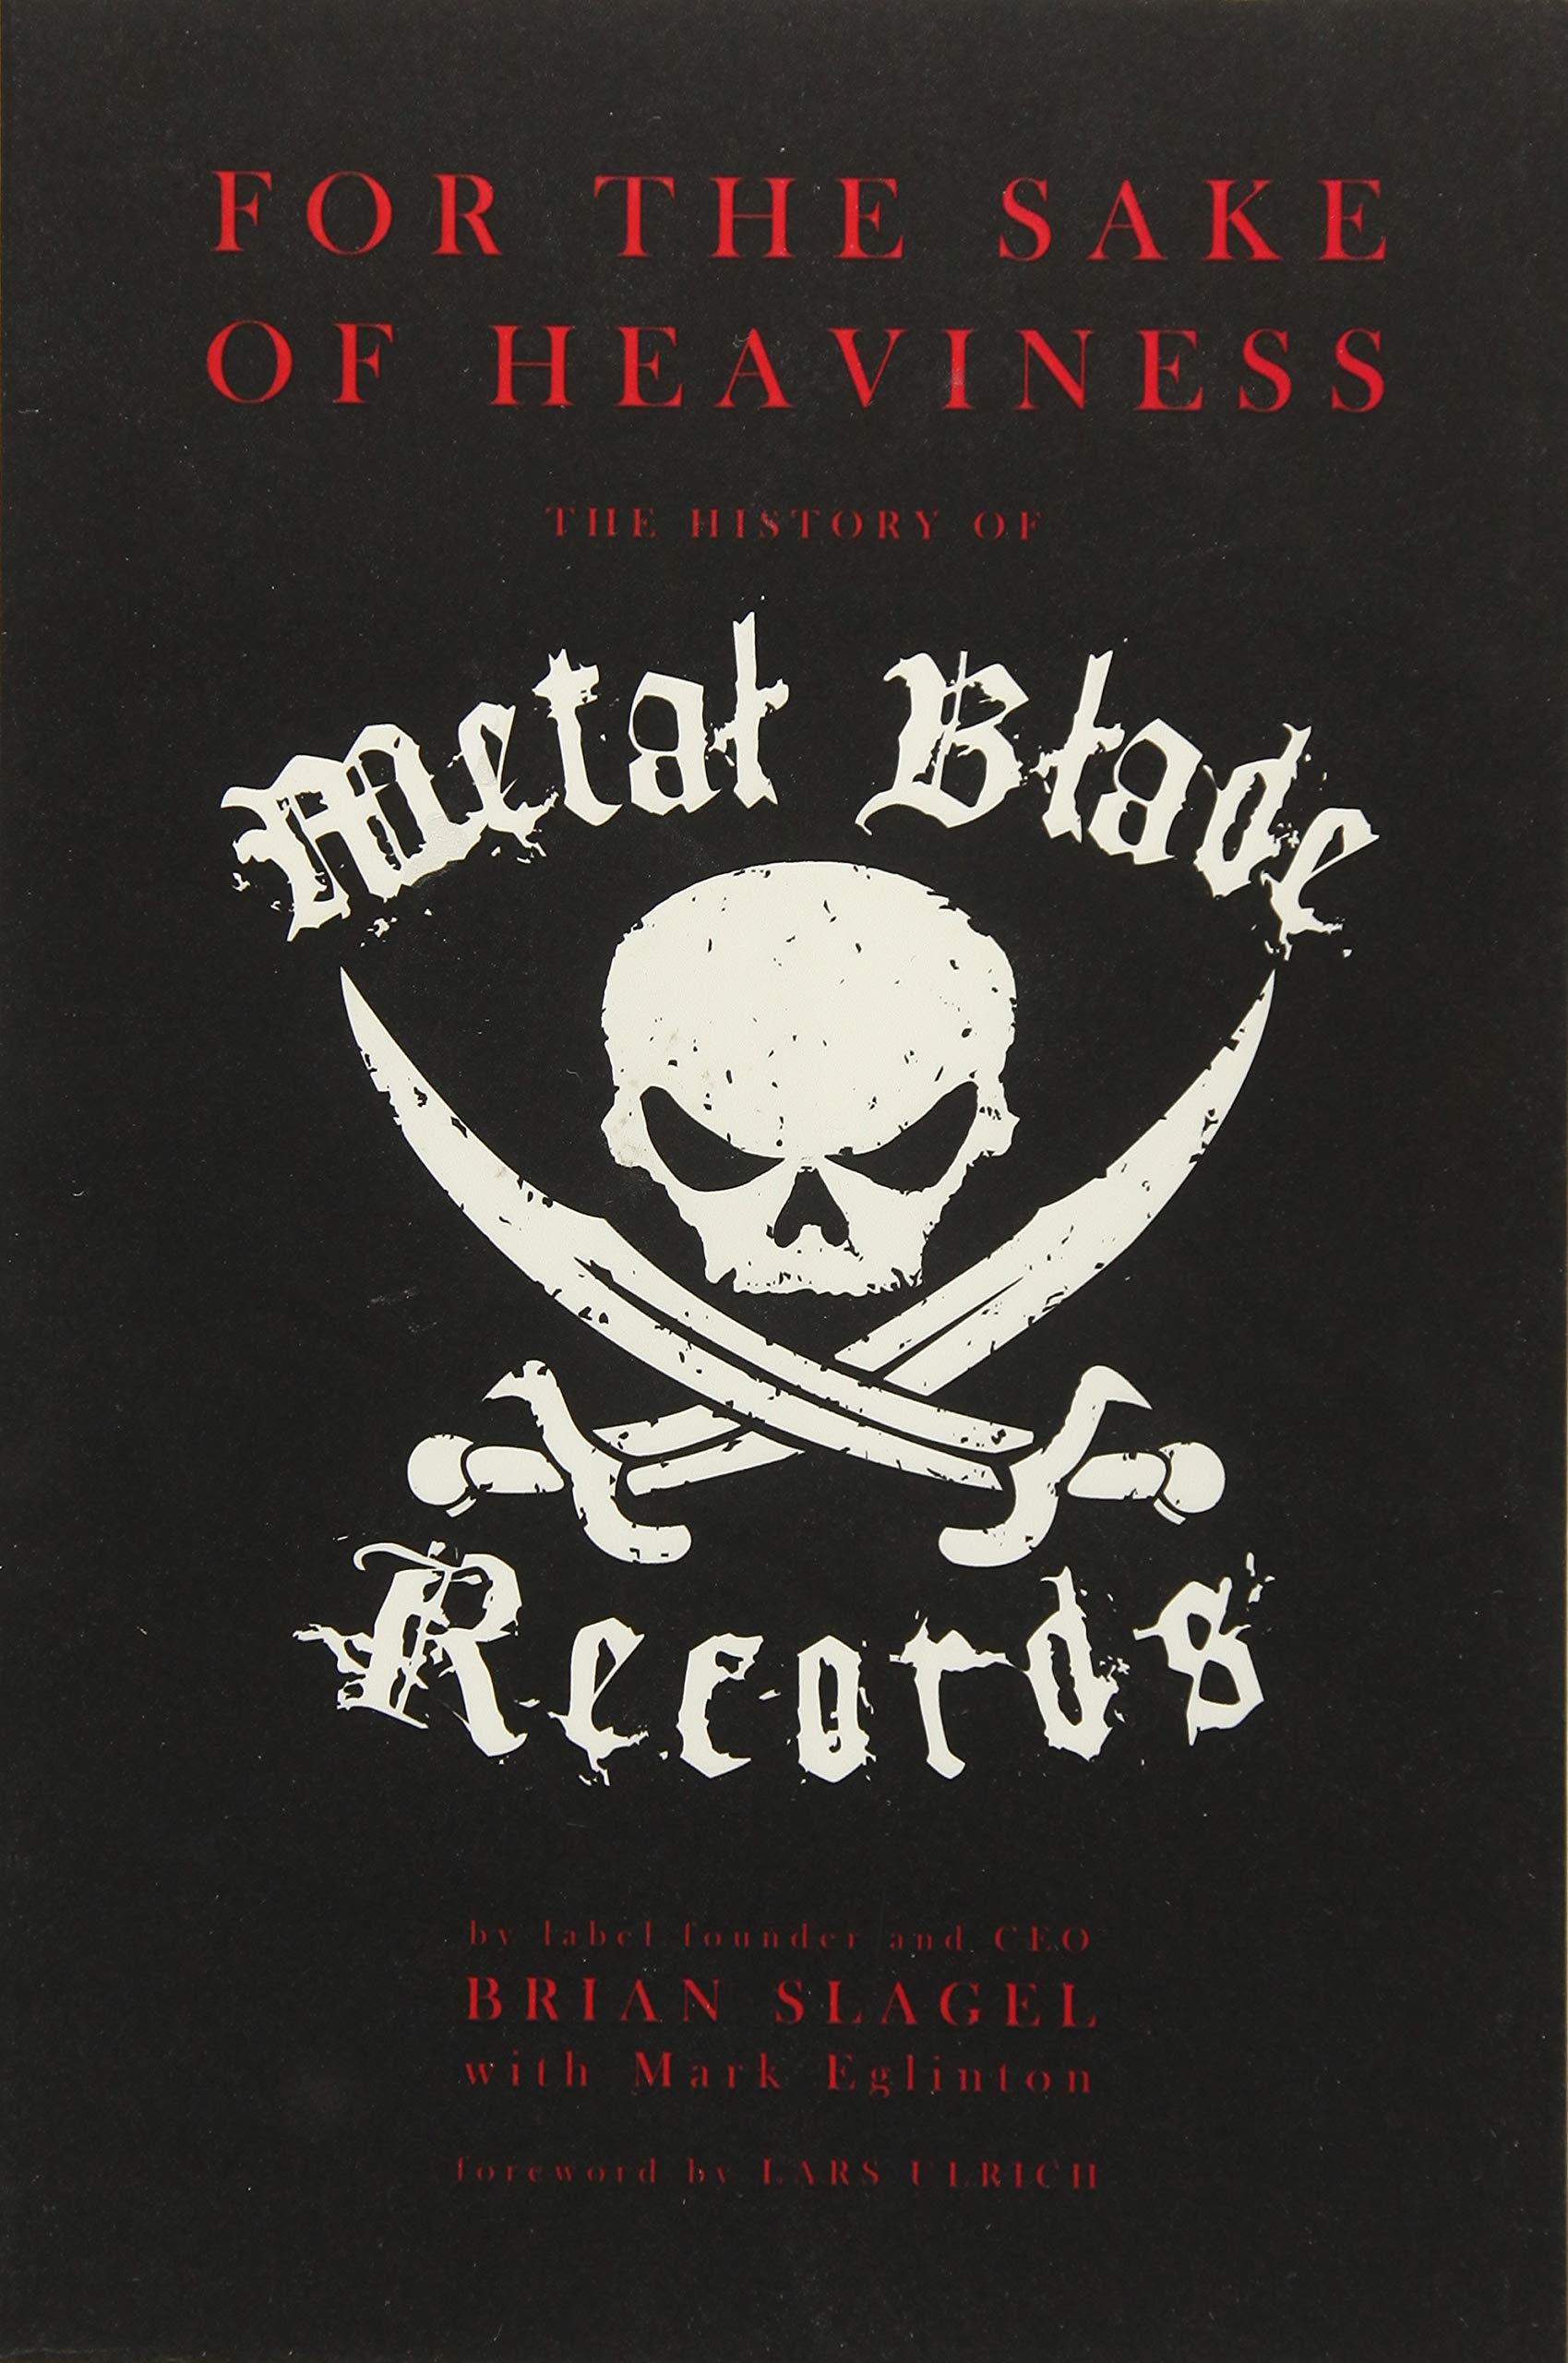 For The Sake of Heaviness: The History of Metal Blade Records